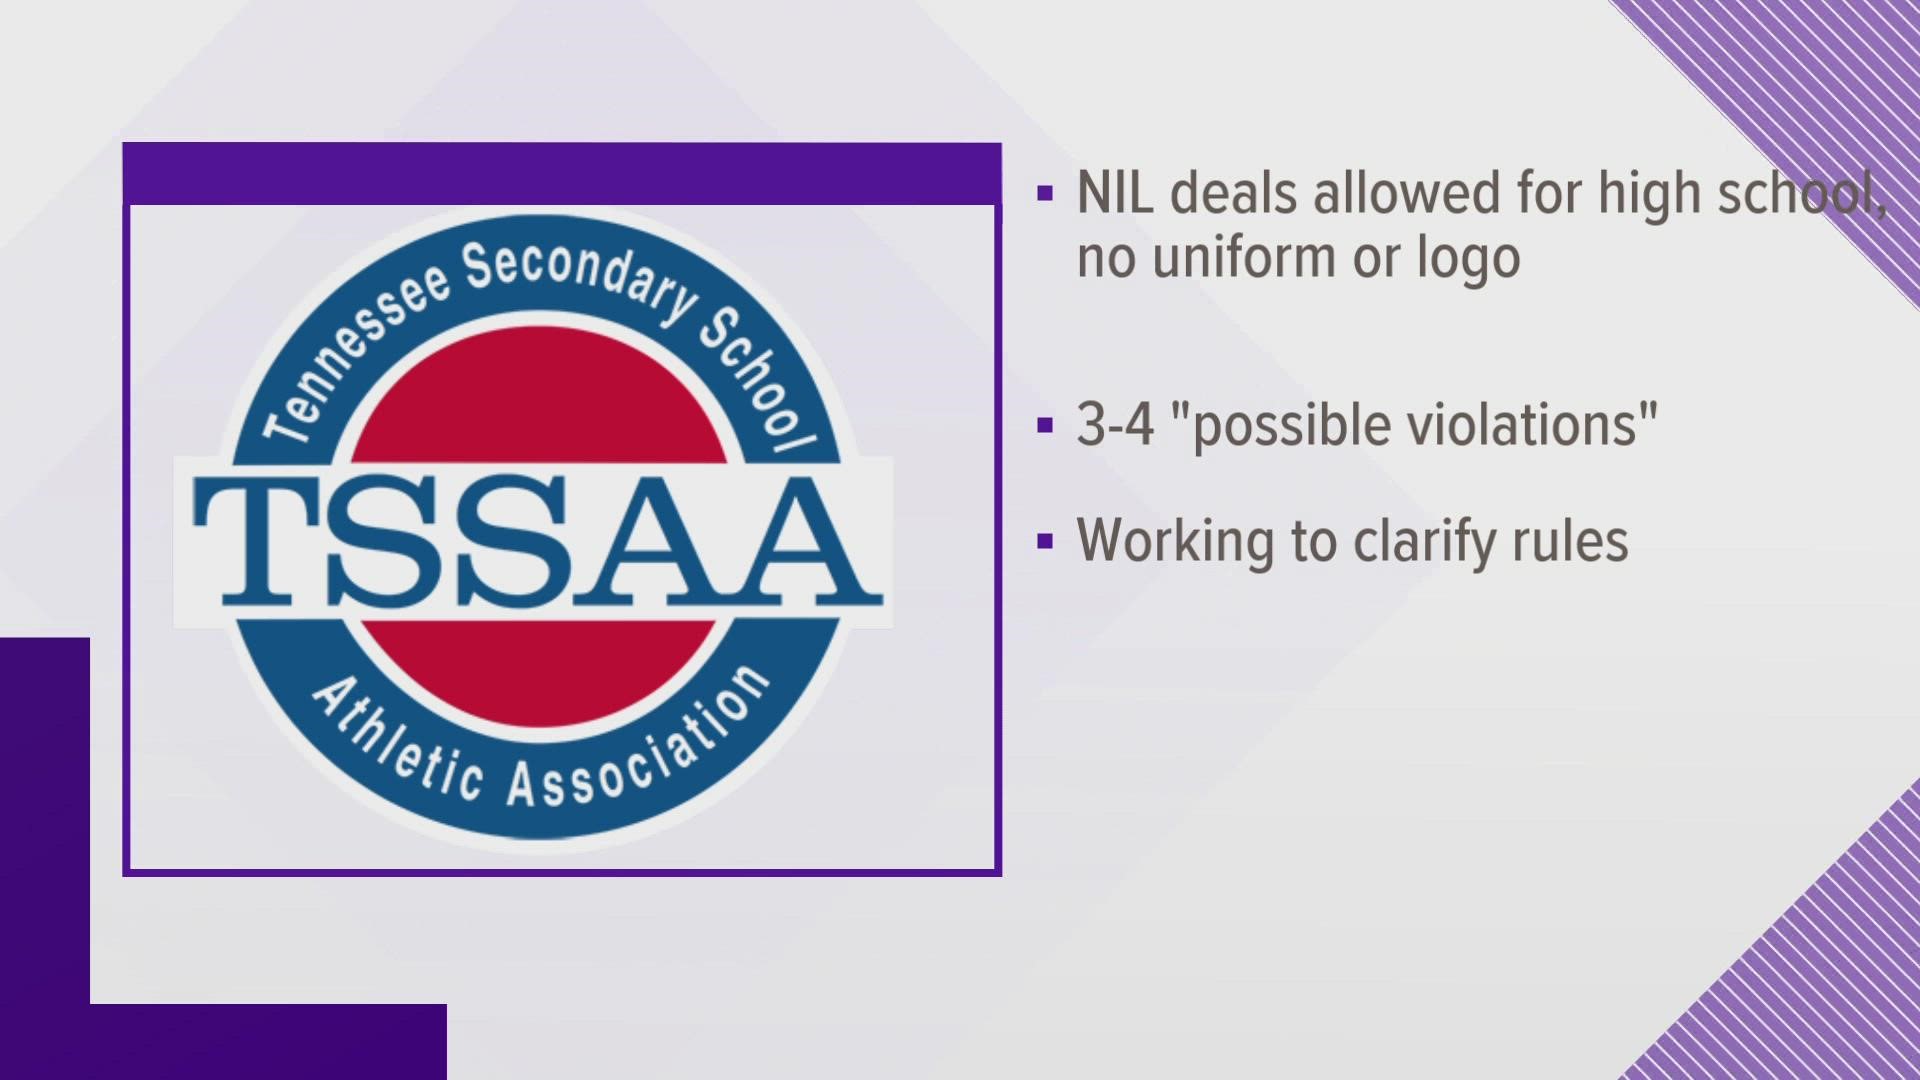 The TSSAA voted to sanction lacrosse teams, both girls and boys, across the state. They also discussed its new NIL rules for high school athletes.